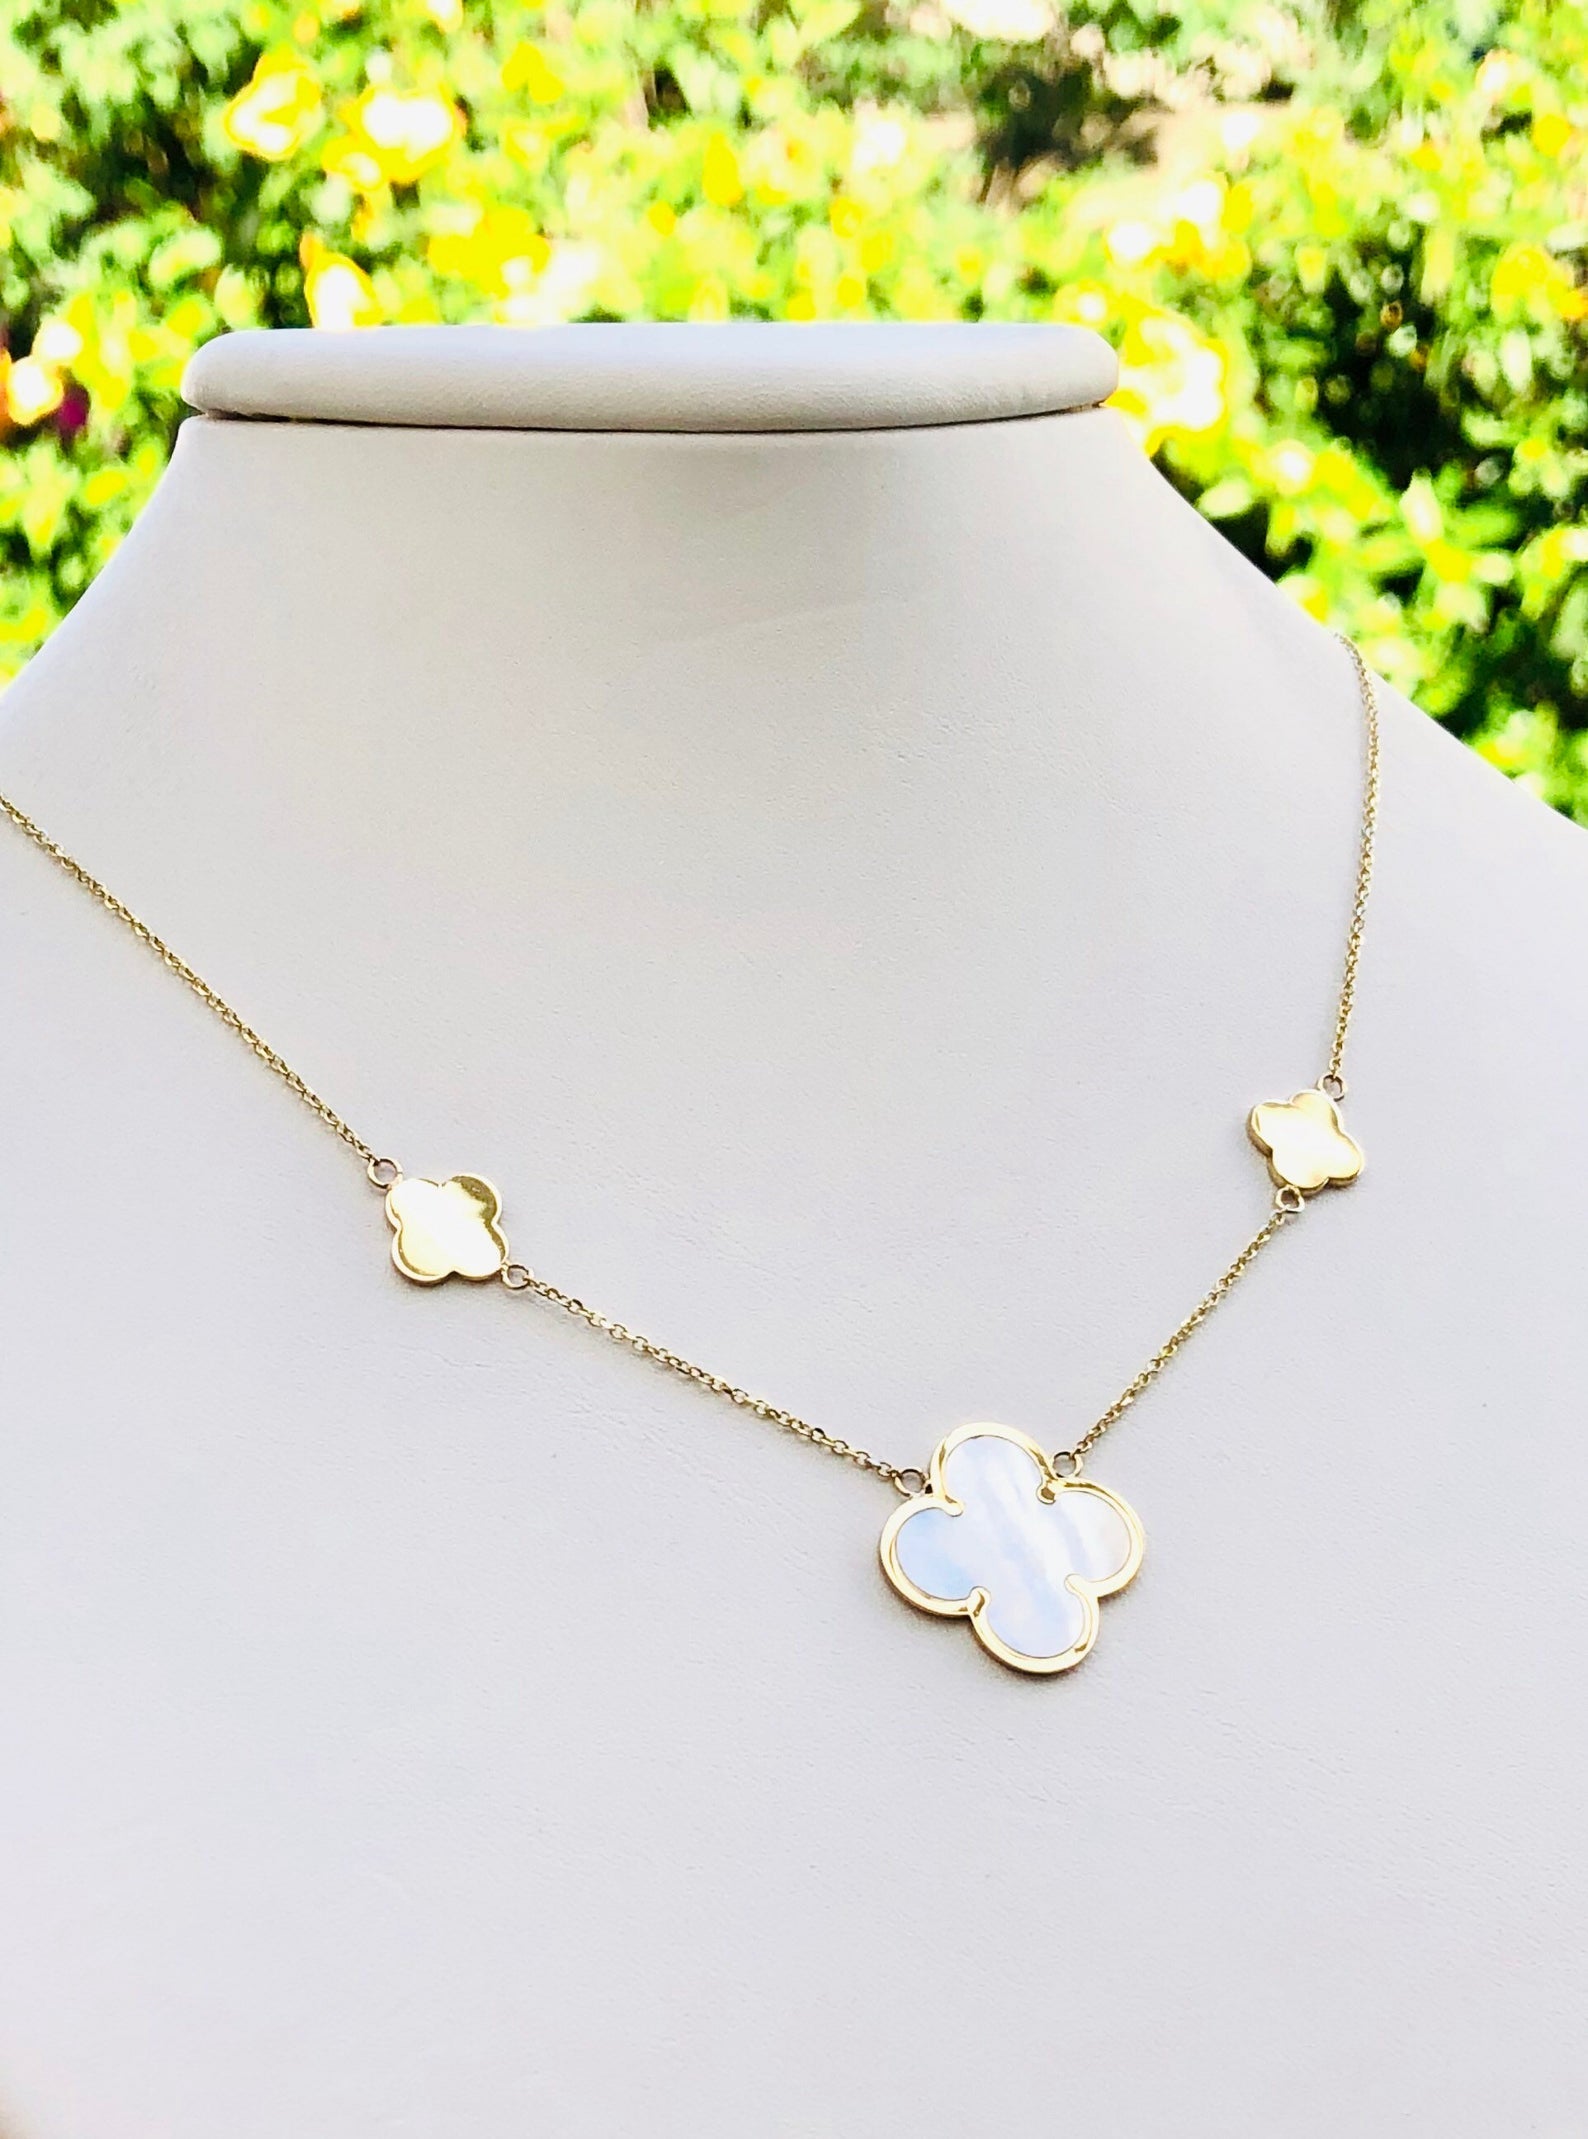 14K Italian Gold Mother of Pearl Flower Necklace 